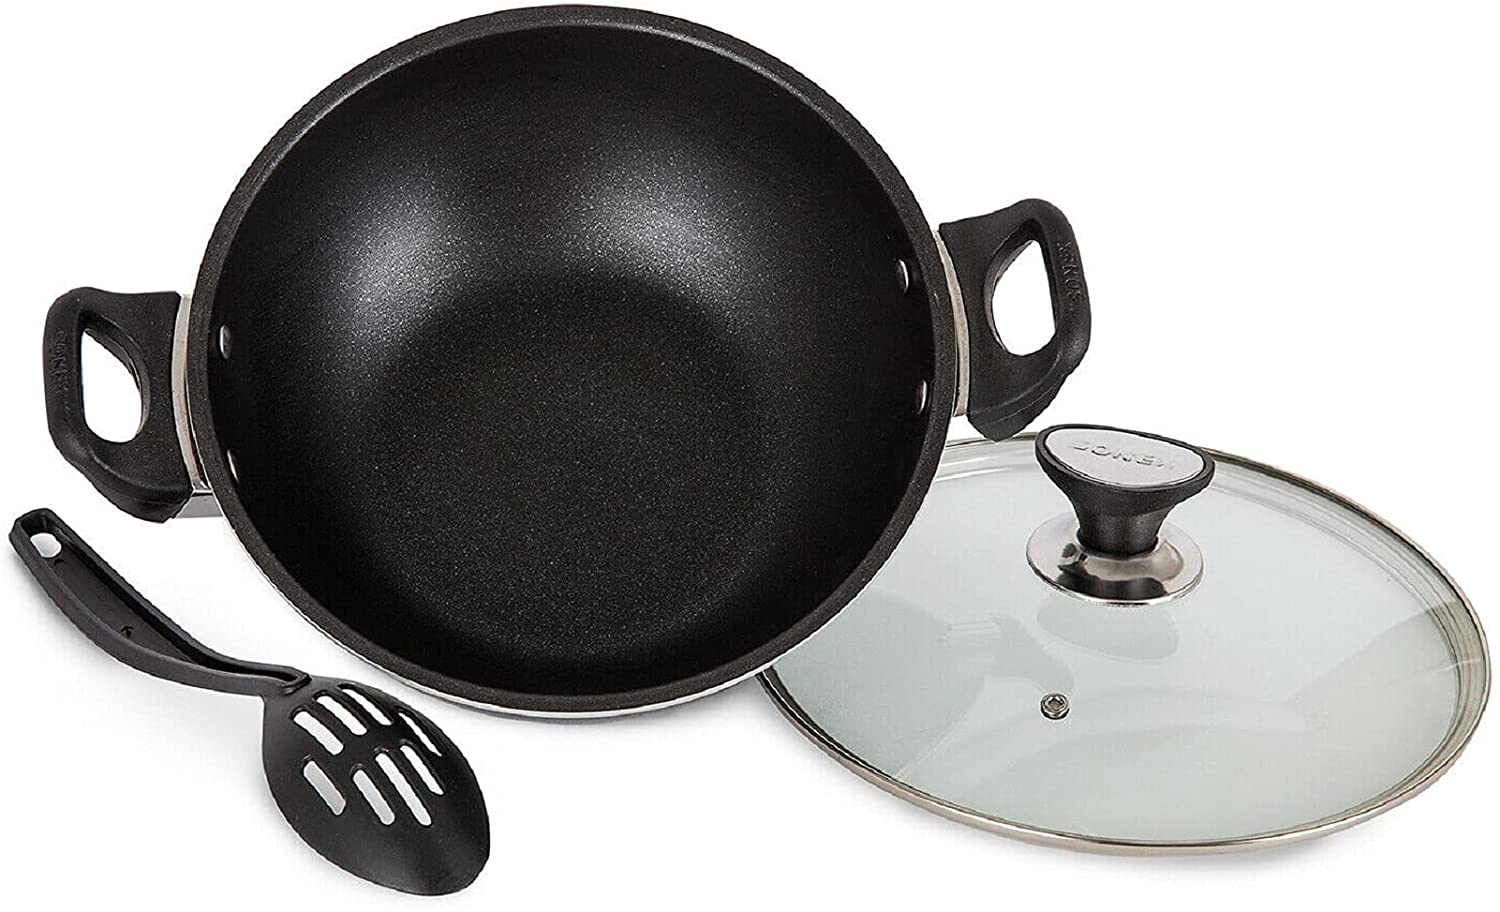 Heavy Material | Dishware Safe | Sonex | Non Stick | Cooking Wok | Kadhai | Karahi | with Glass Lid and Spoon Durable Soft Handles 27 Cm | Easy To Clean | Original Made In Pakistan – 50049